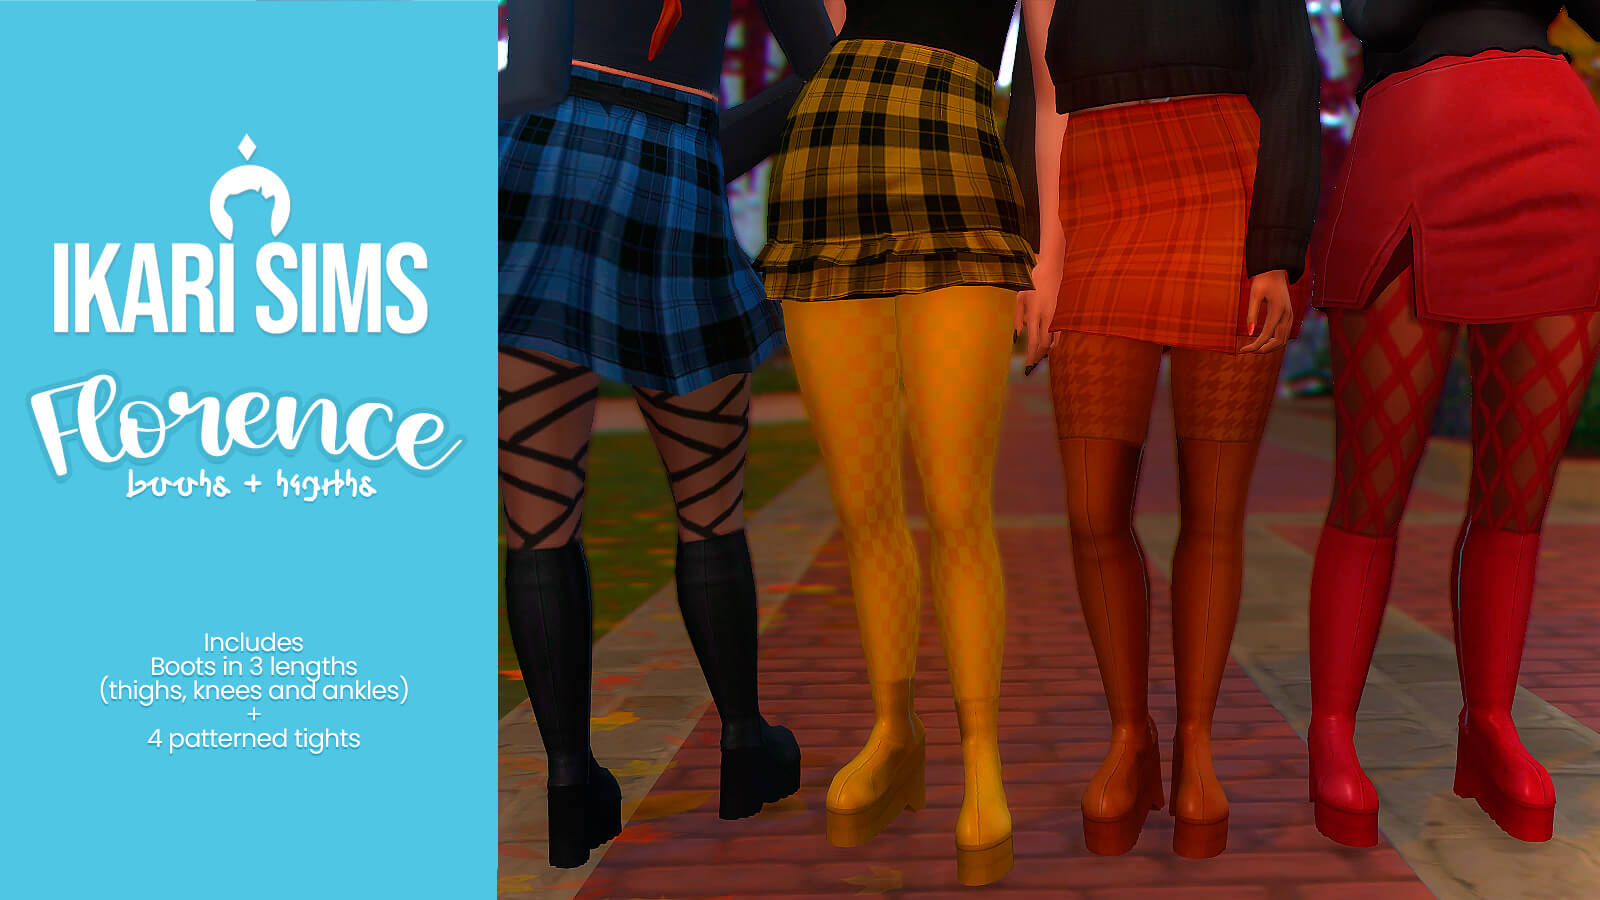 Sims 4 Florence Boots Patterned Tights The Sims Book